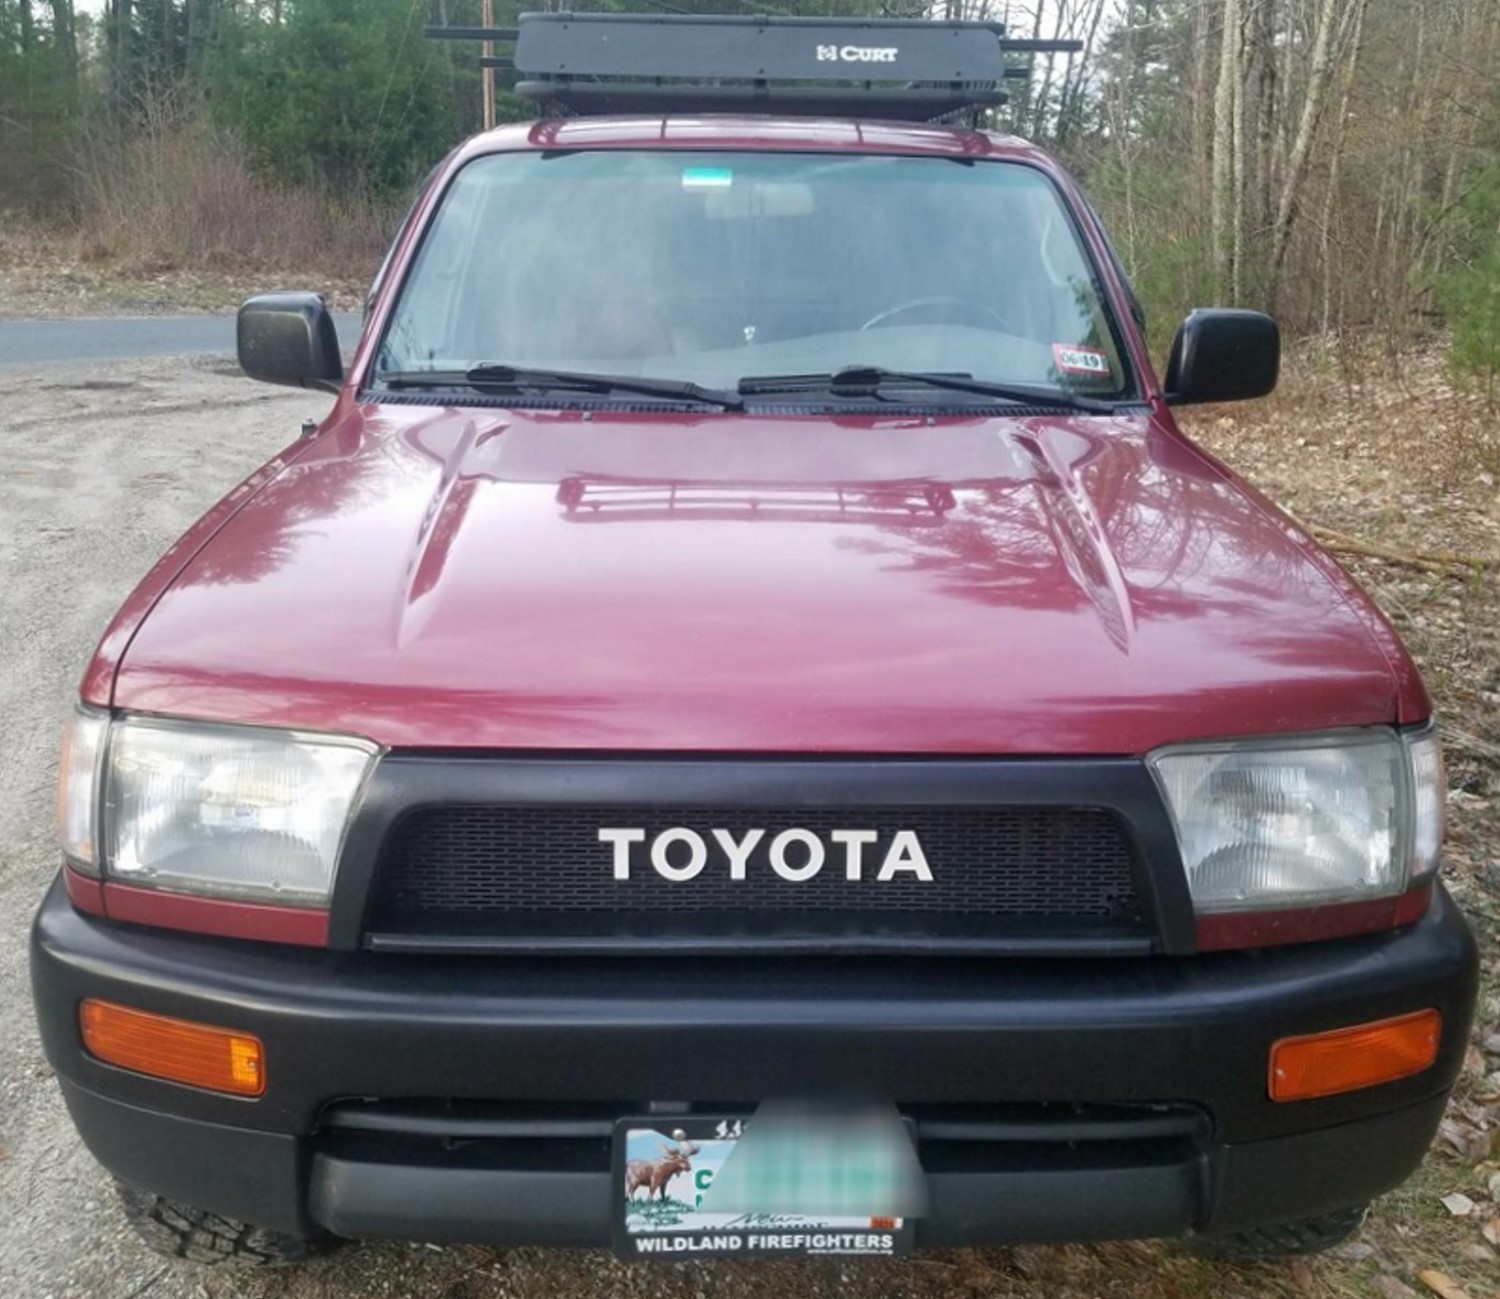 The Ultimate Upgrade: All Black Satoshi Grille Mod with White Toyota Emblem for 3rd Gen 4Runner